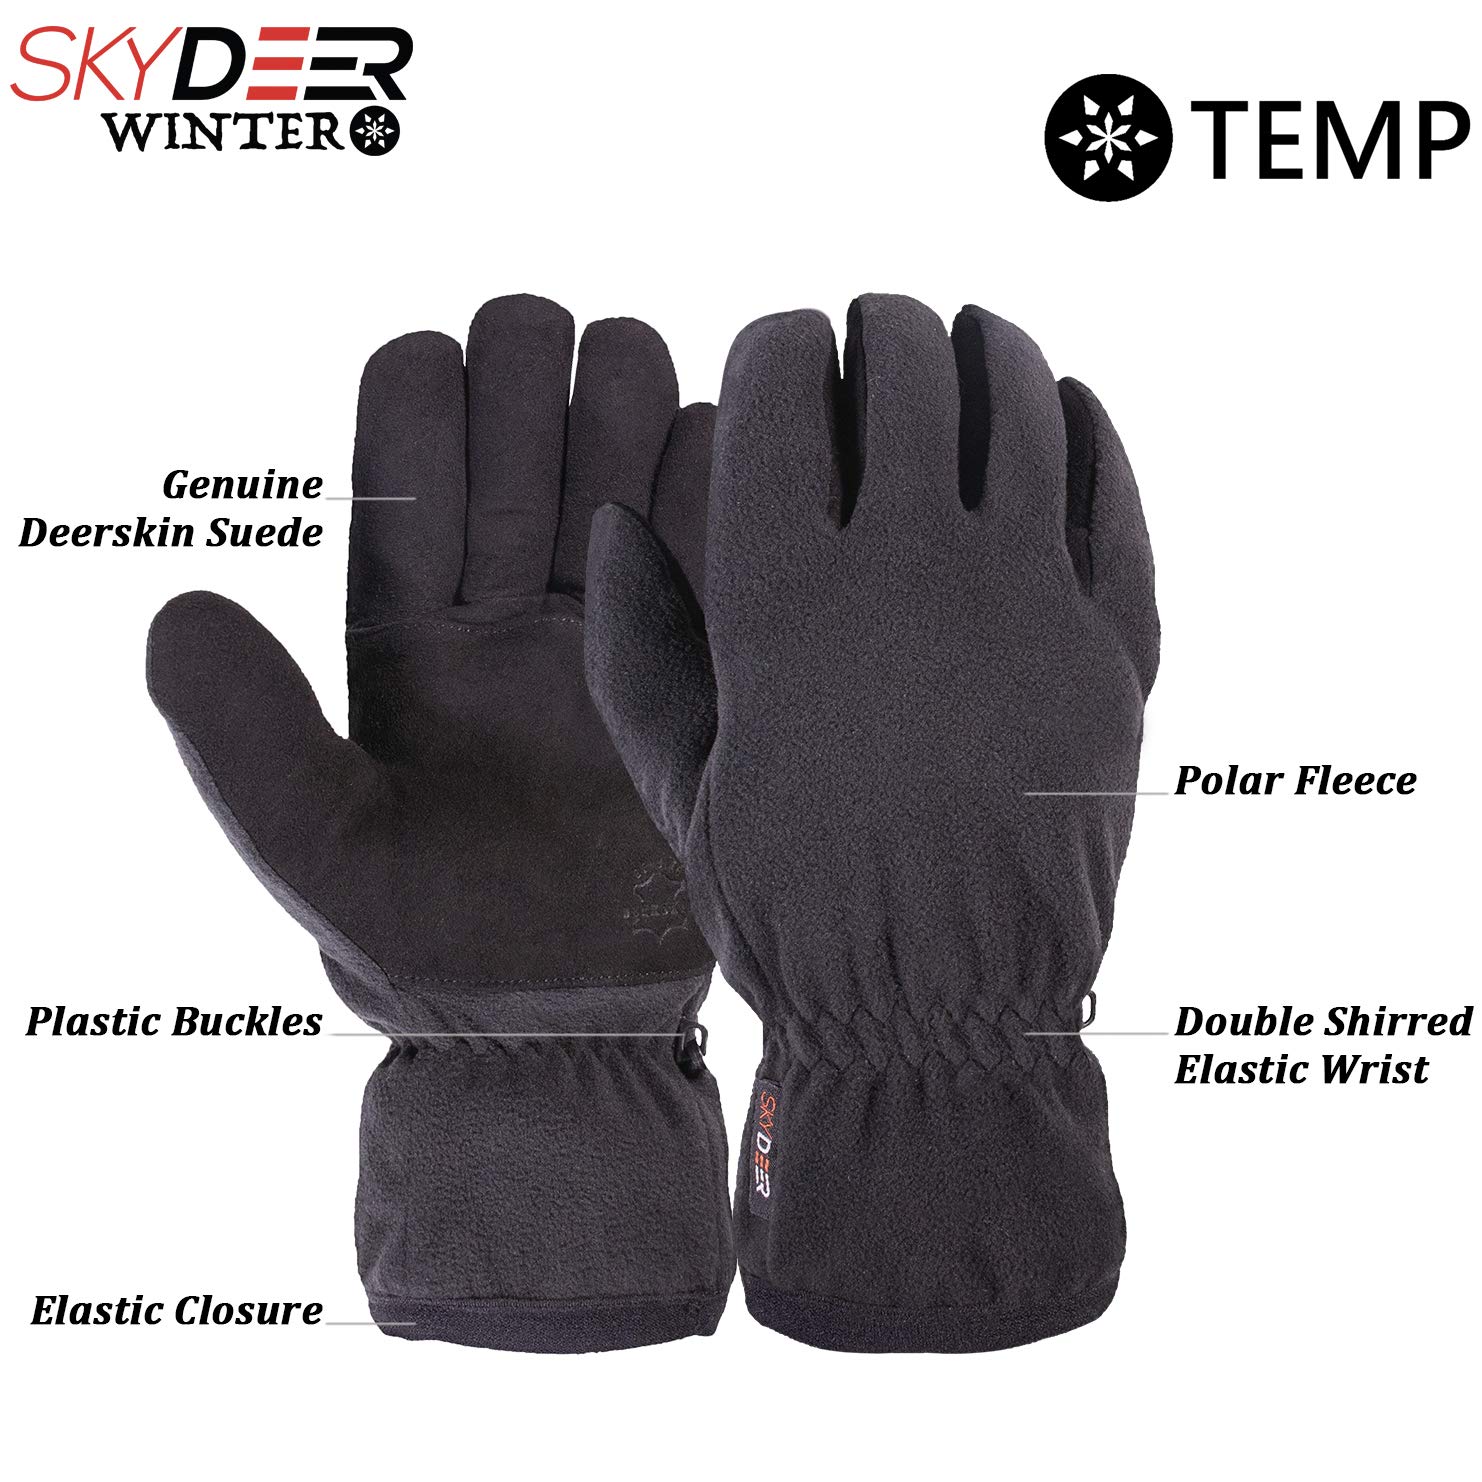 SKYDEER Winter Gloves with Premium Genuine Deerskin Suede Leather and Windproof Polar Fleece (Unisex SD8661T/L, Warm 3M Thinsulate Insulation)